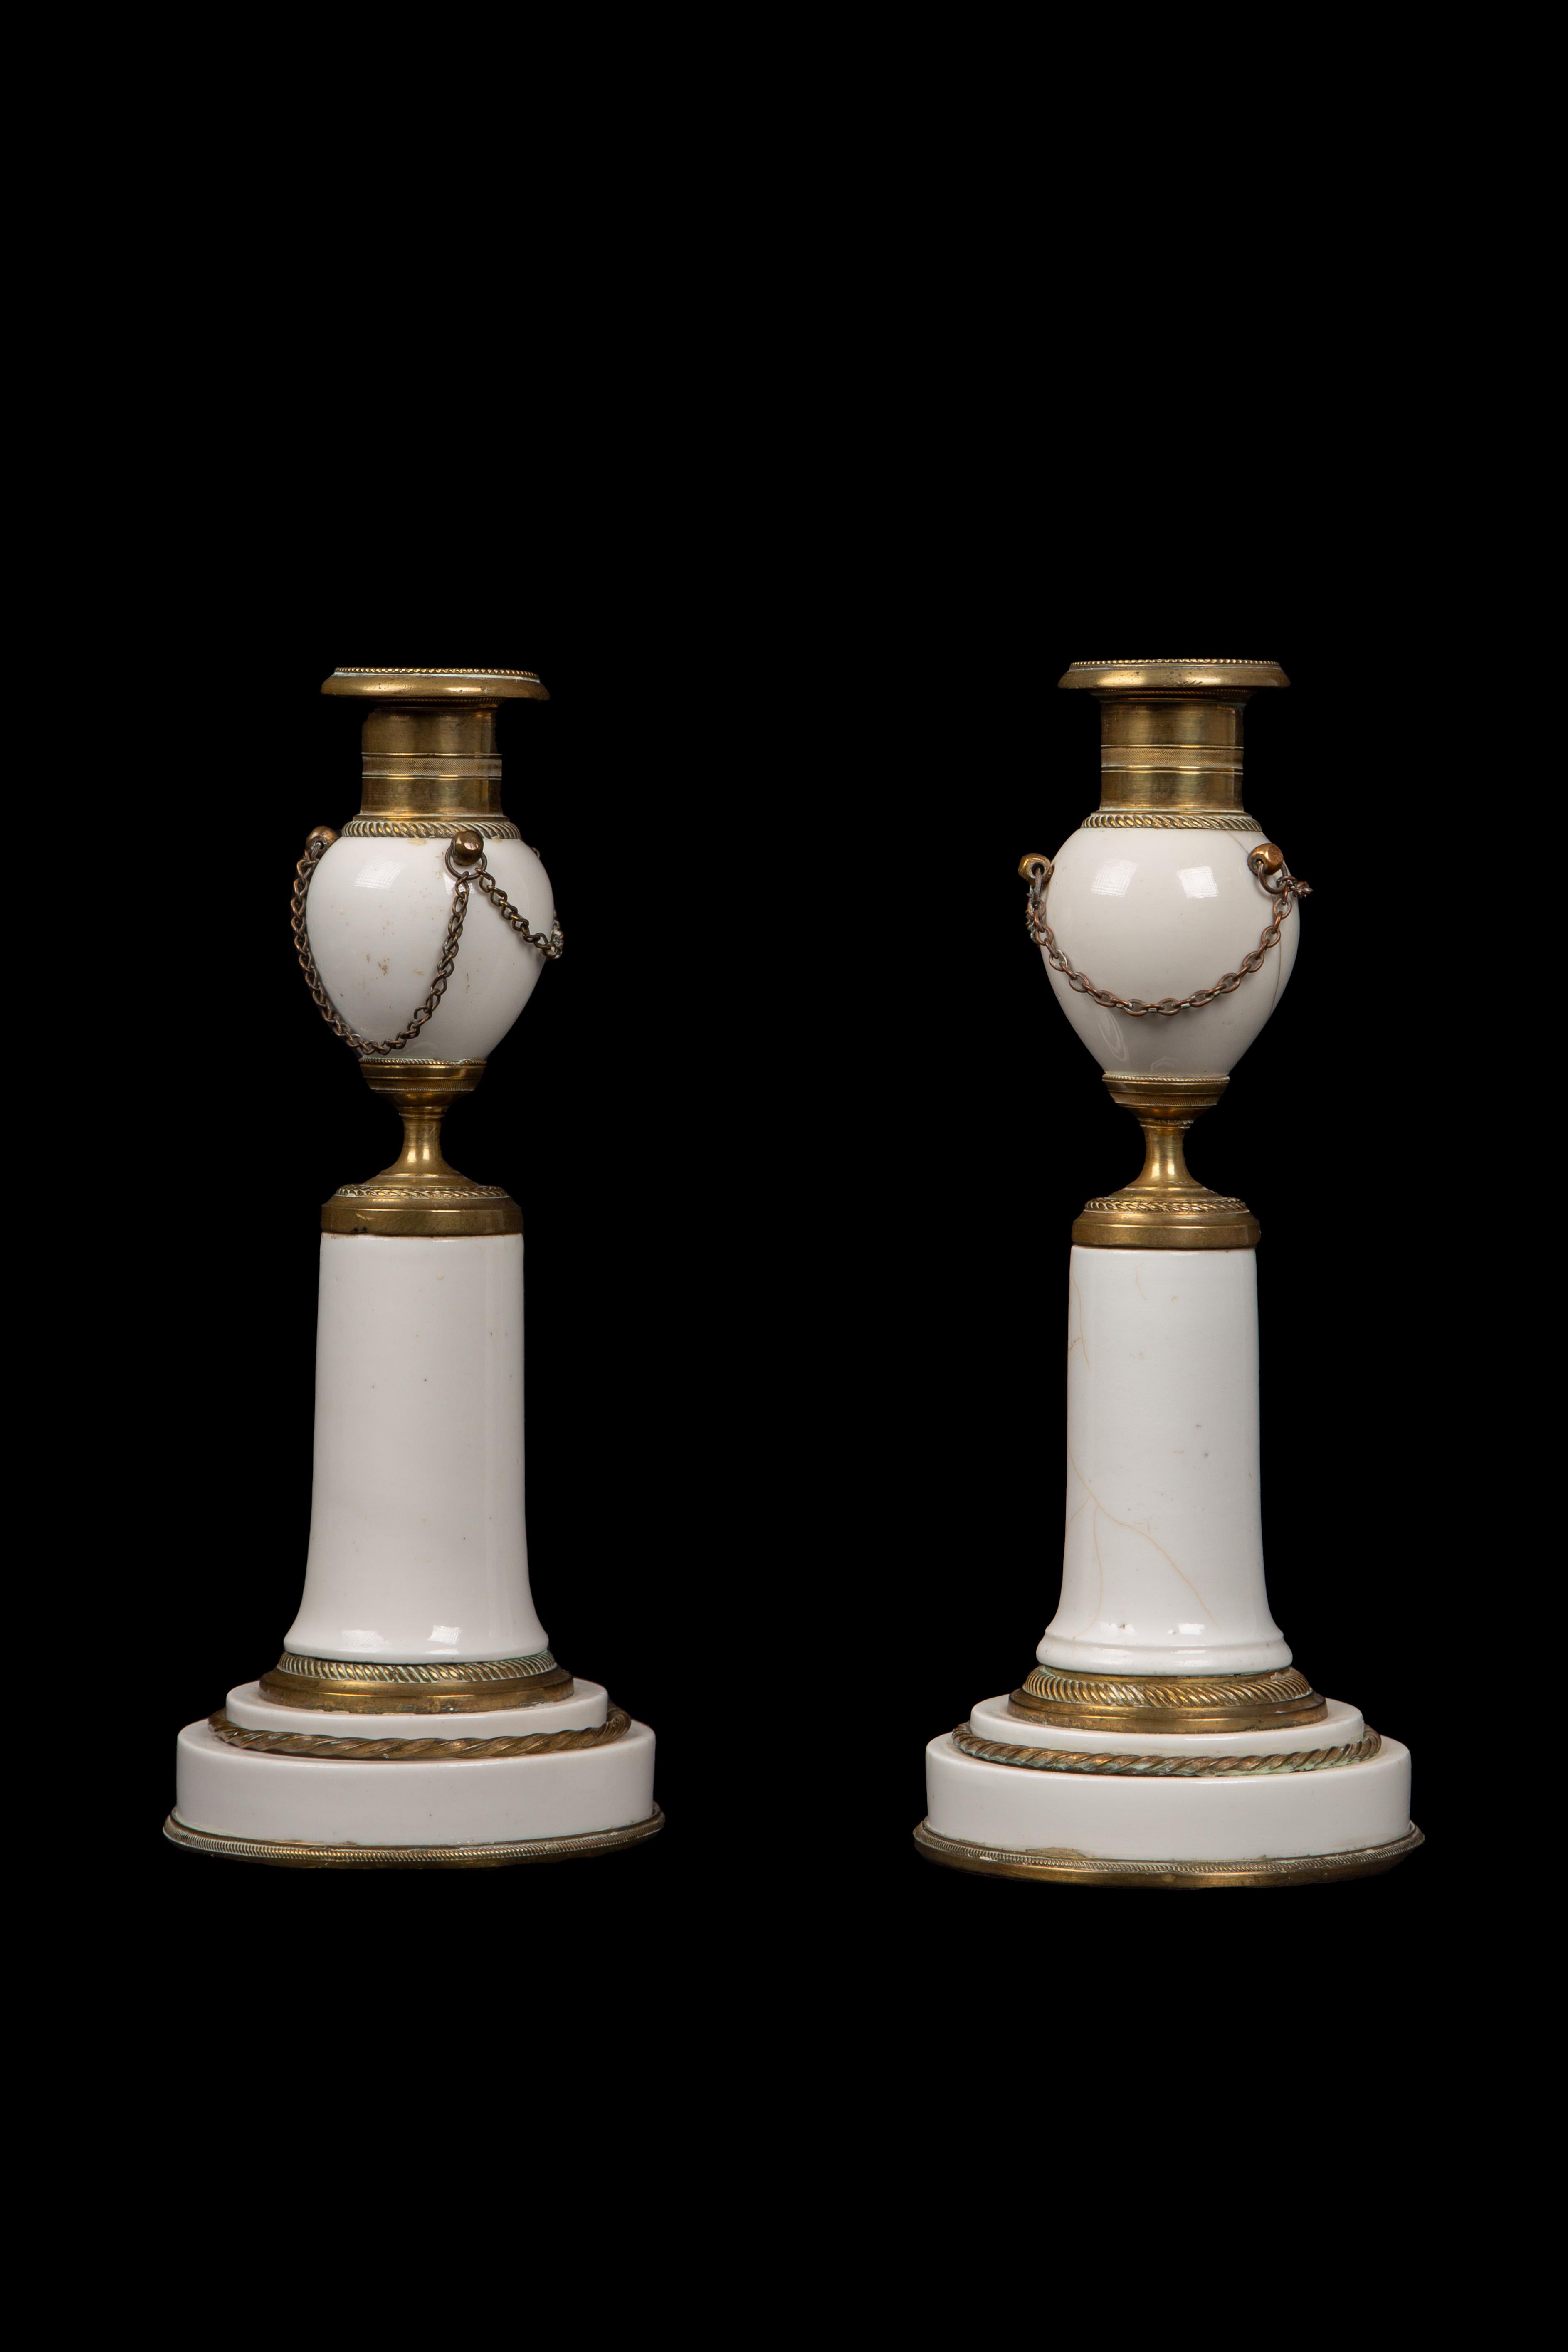 These exquisite candlesticks, originating from the late Louis XVI period, epitomize the refined and neoclassical design sensibilities of their time. Crafted from exquisite white porcelain, highly coveted for its delicate and pristine appearance,